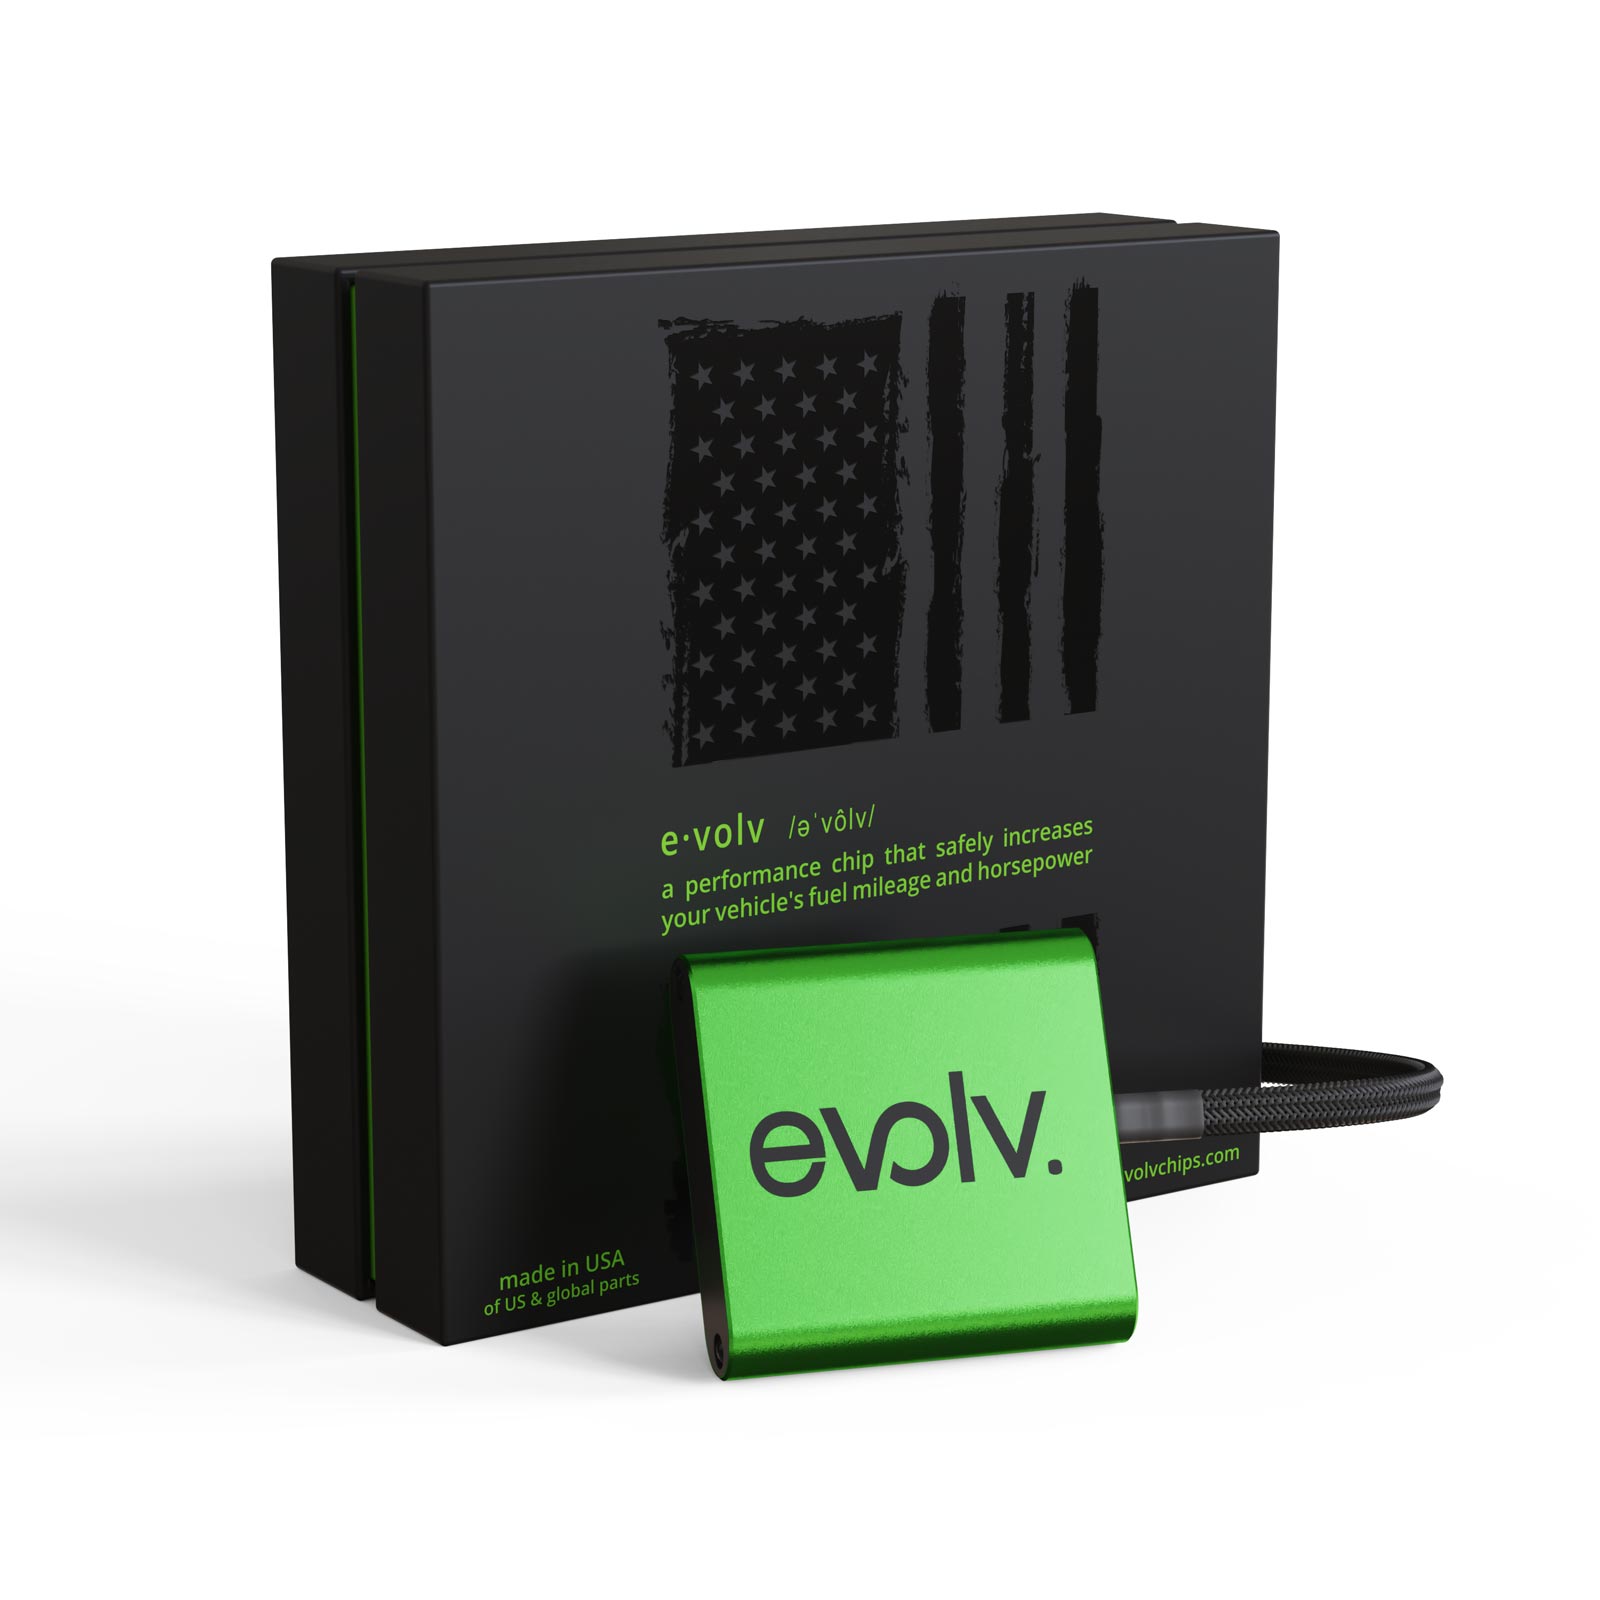 Increase your fuel mileage, performance and throttle response with an Evolv Saturn Relay Performance Chip!